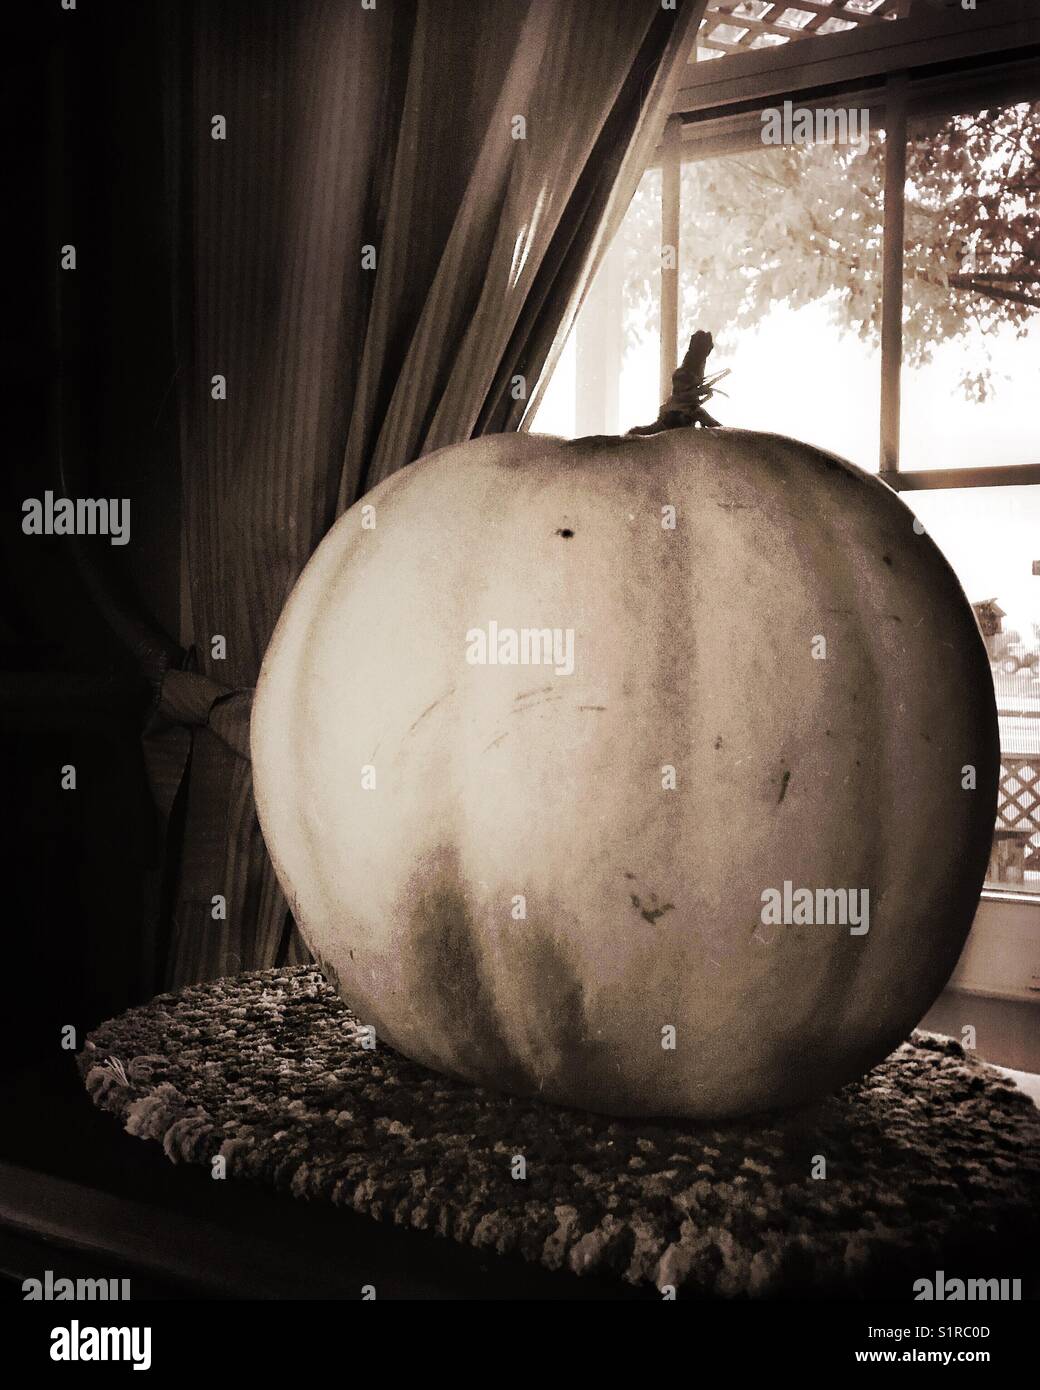 A giant white pumpkin decorates the interior of a home and is visible through the window from the outside. Stock Photo